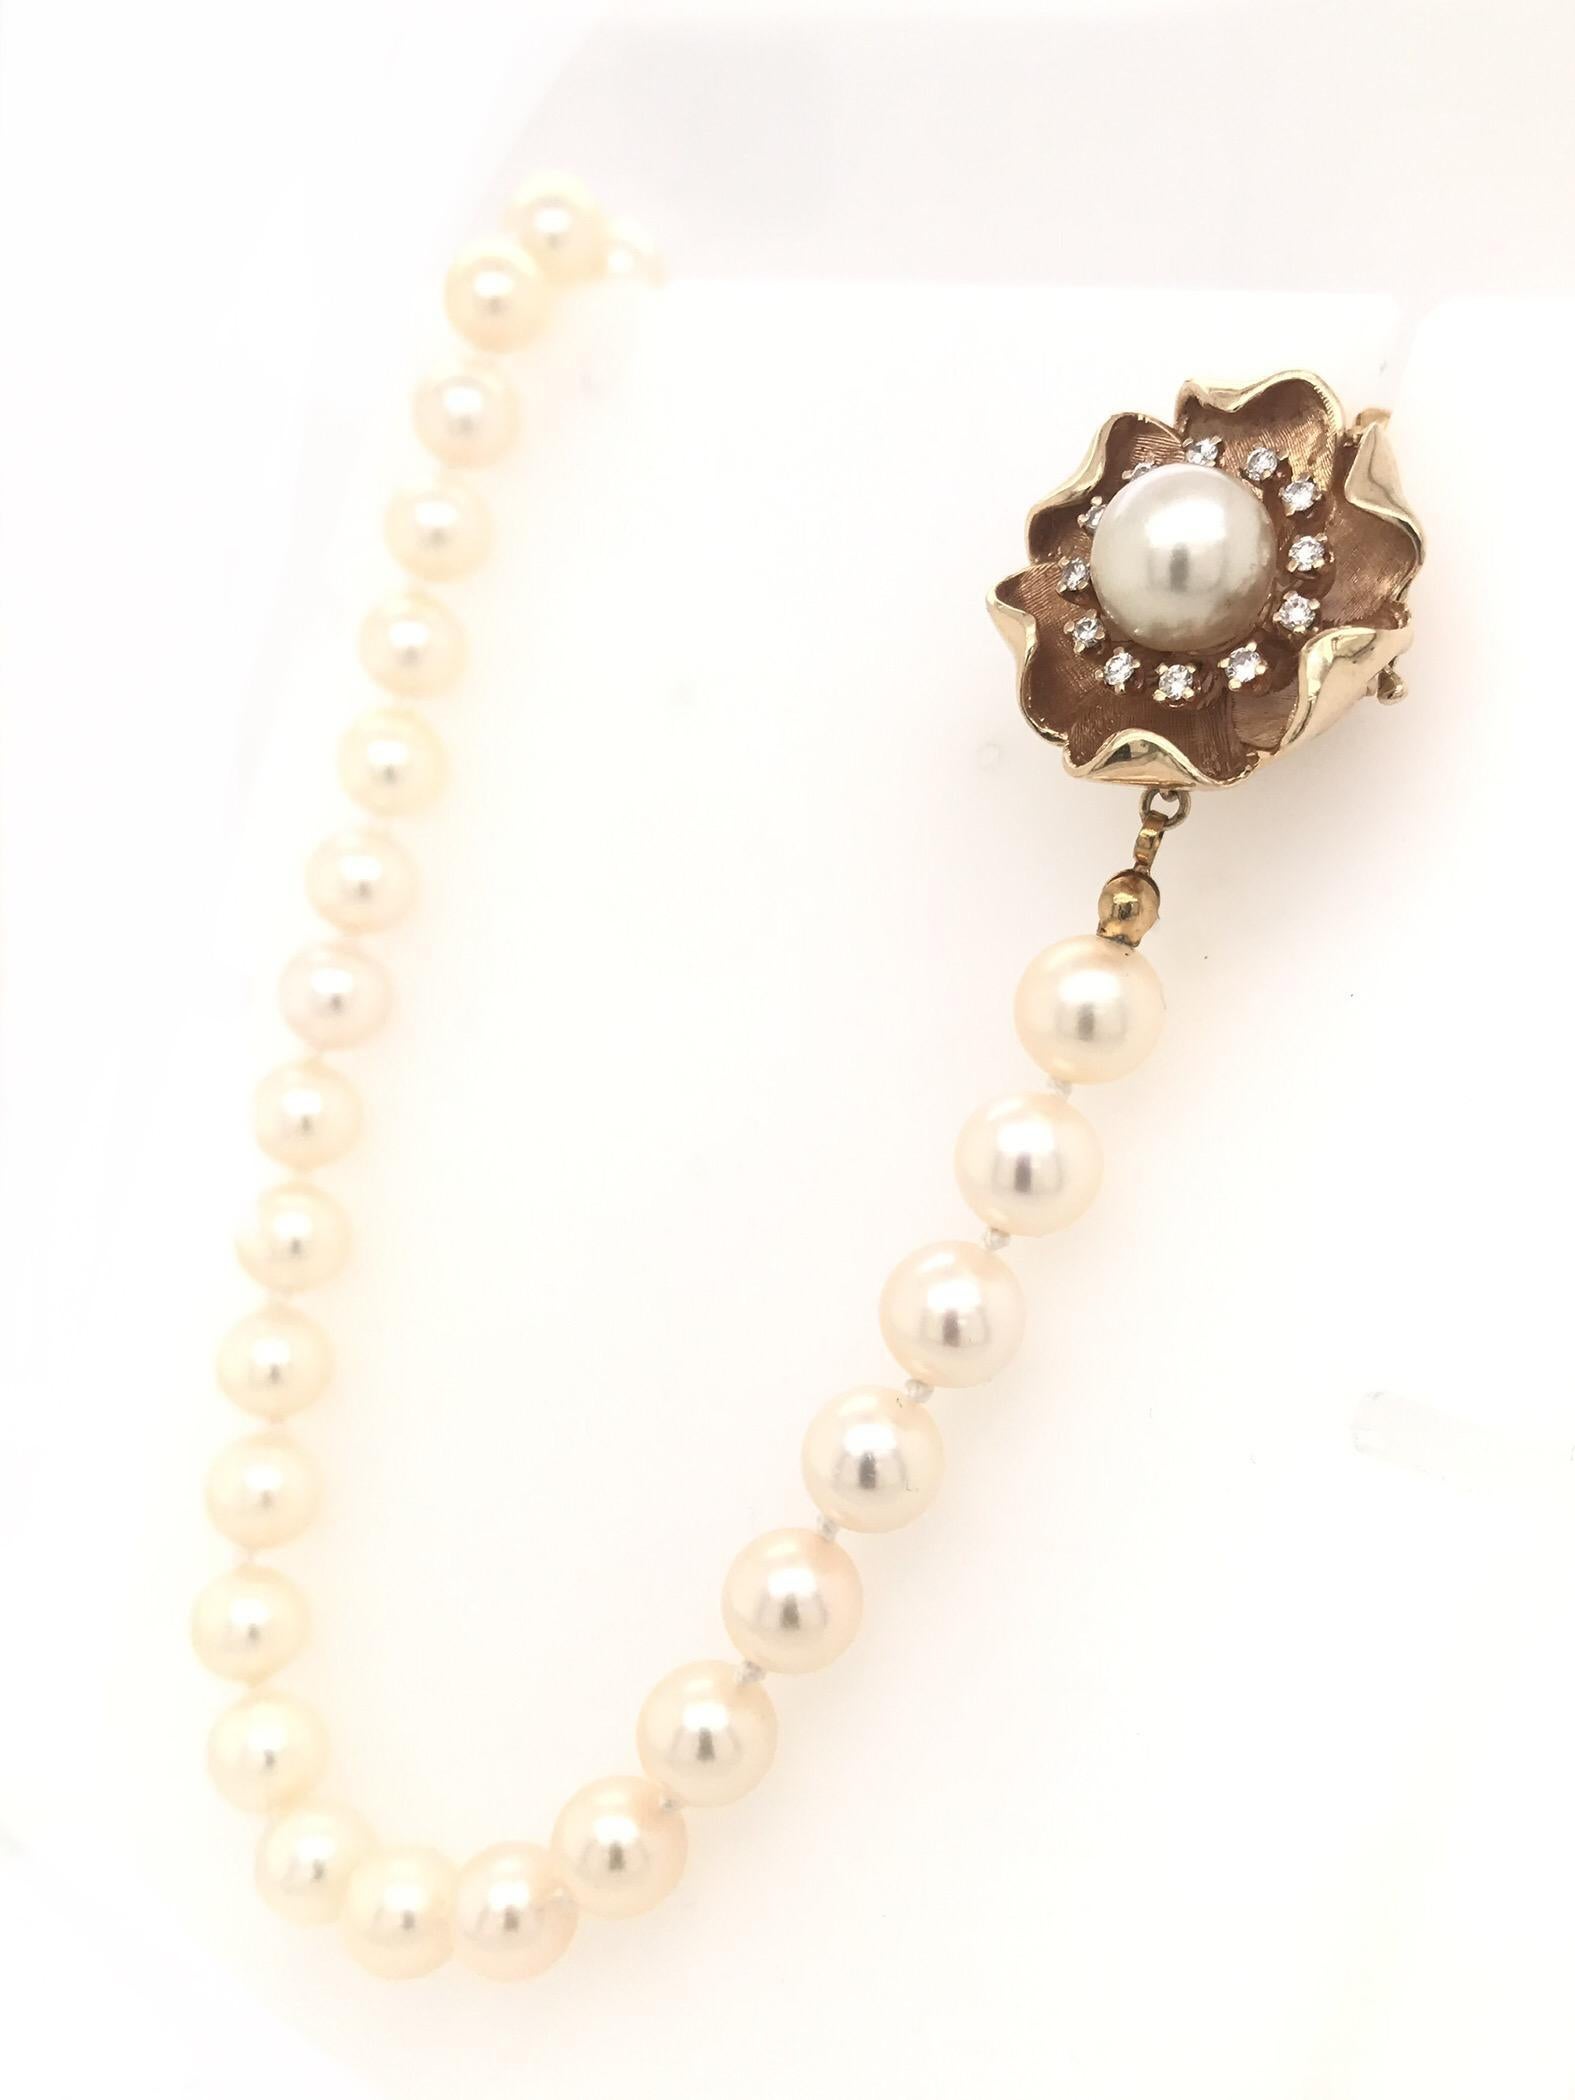 Retro Vintage Mid Century 7.5 Mm Pearl Necklace With Floral Diamond Clasp